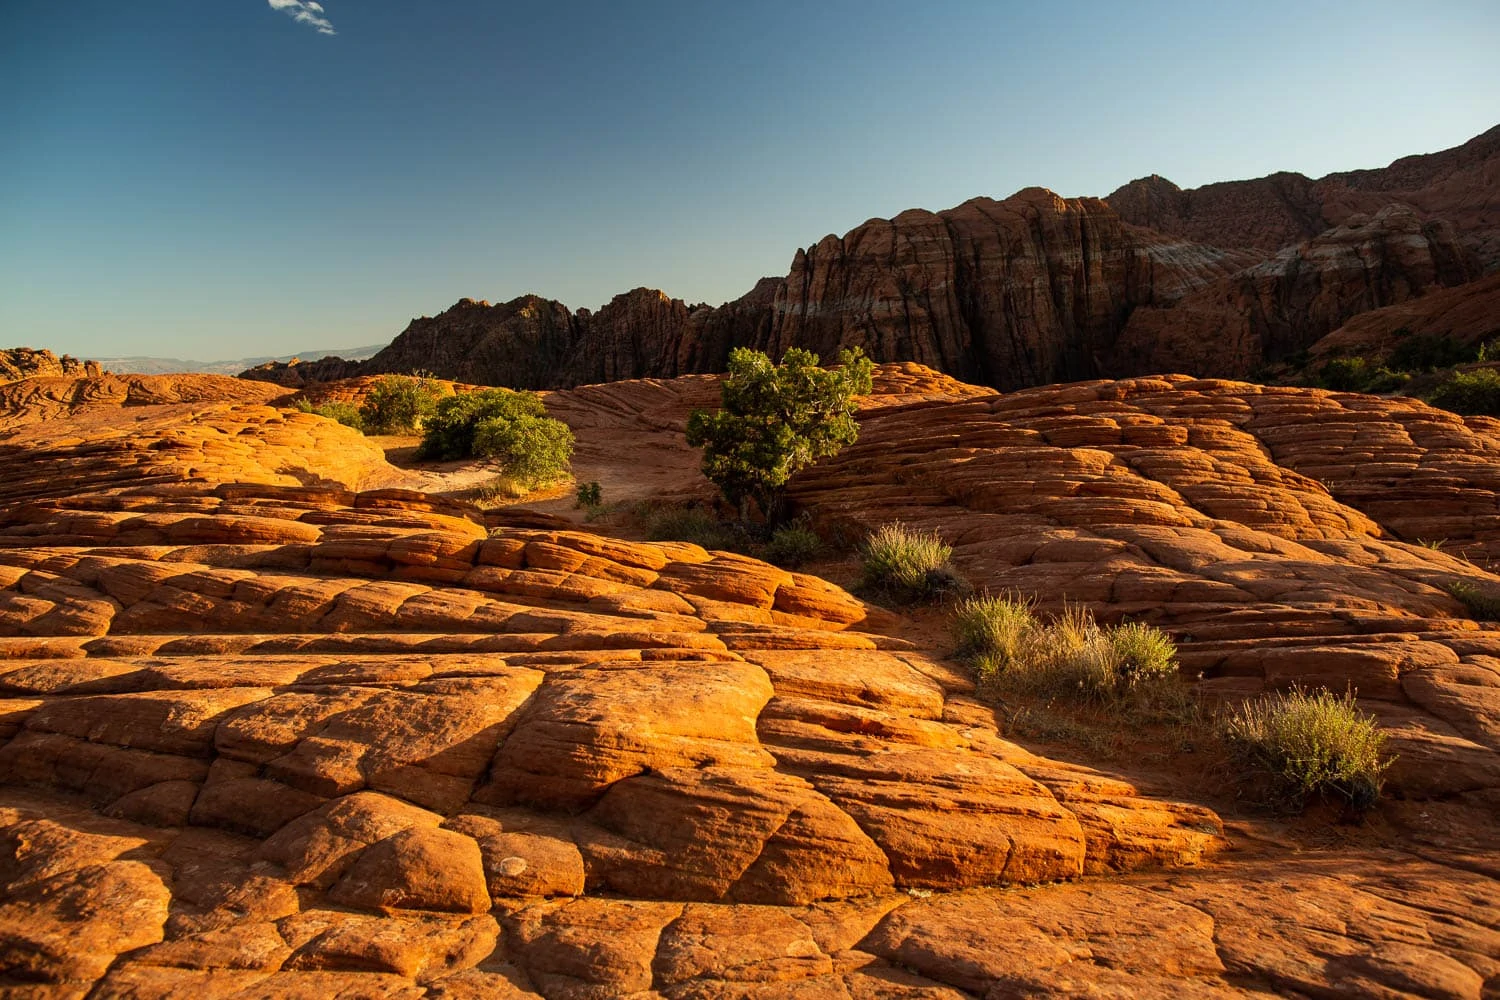 Orange stone dunes roll endlessly to the horizon in Snow Canyon state park.